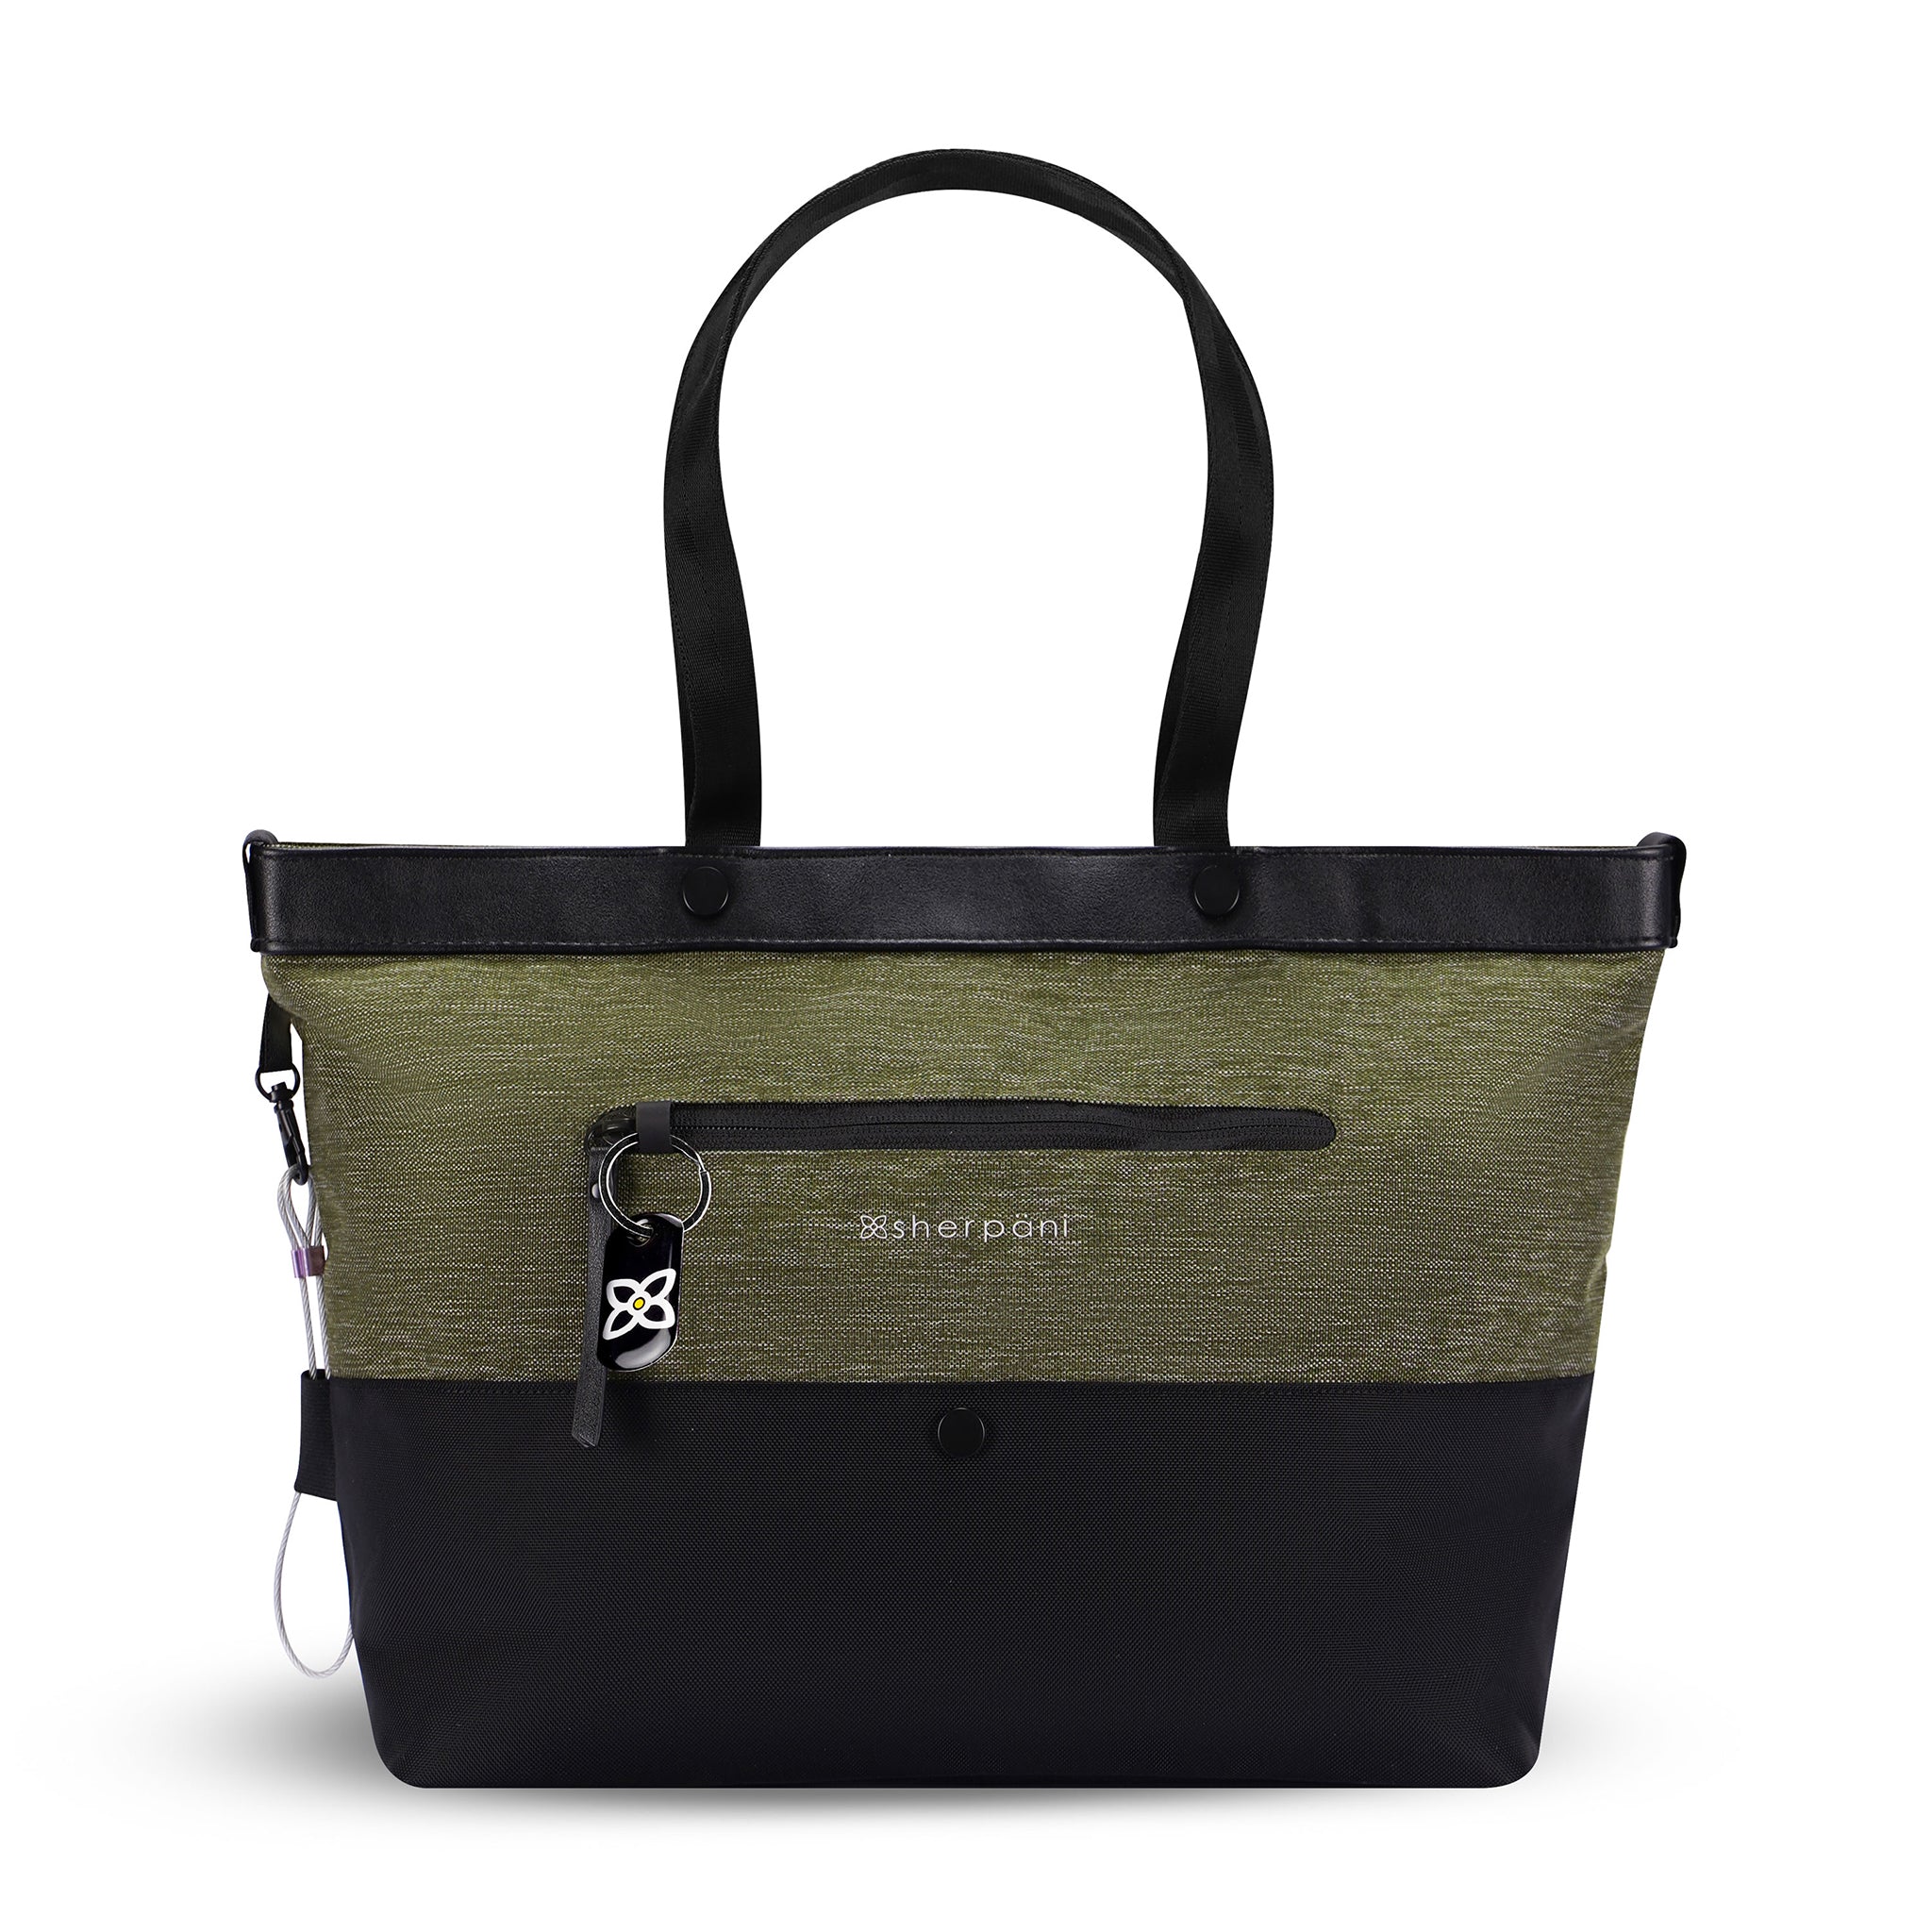 Flat front view of Sherpani's Anti-Theft tote, the Cali AT in Loden, with vegan leather accents in black. There is an external compartment on the front of the bag with a locking zipper and ReturnMe tag. A chair loop lock is clipped to the side of the bag and is held in place by an elastic tab. 